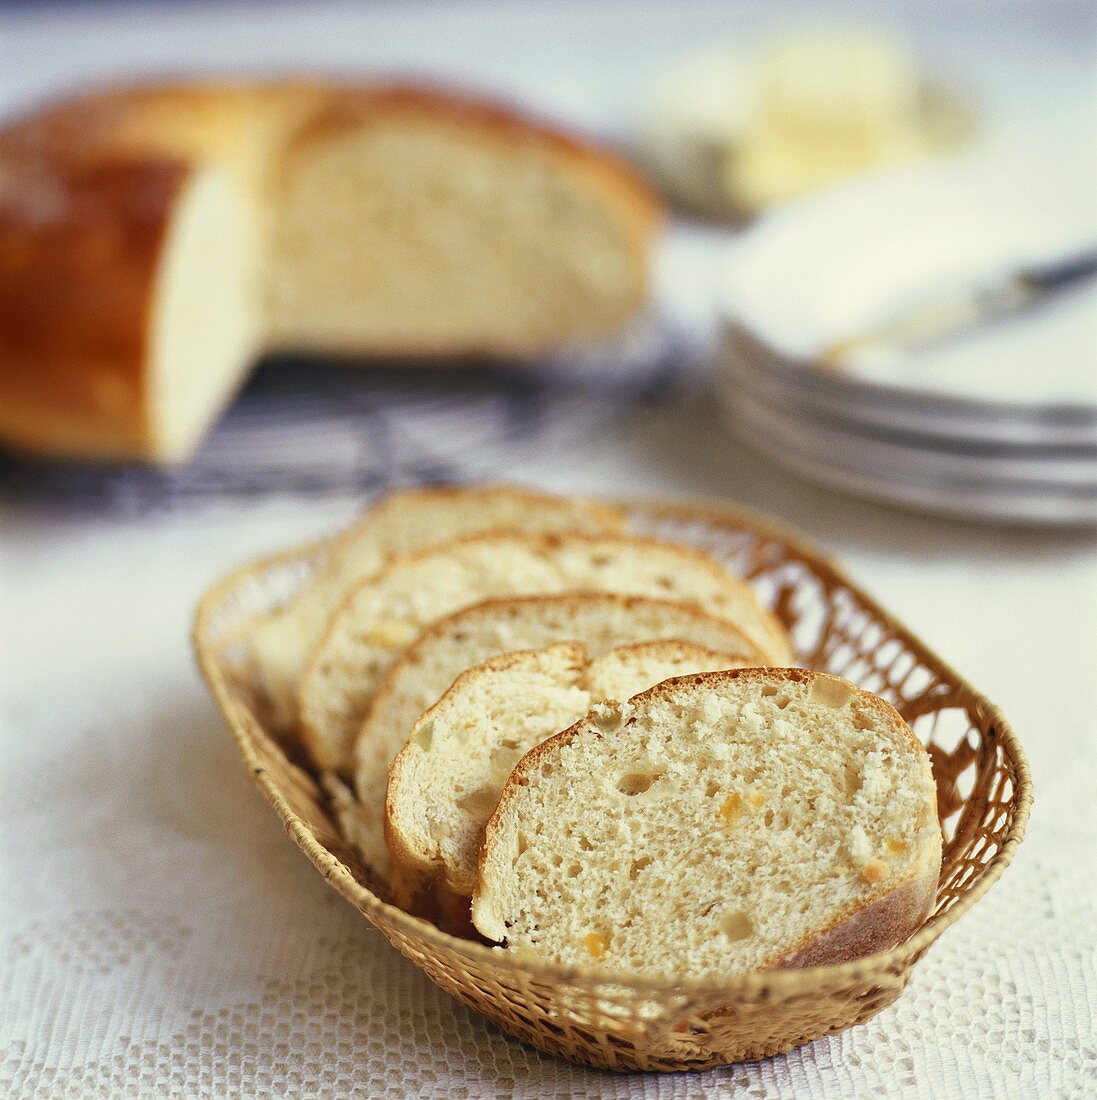 French yeast cake, sliced